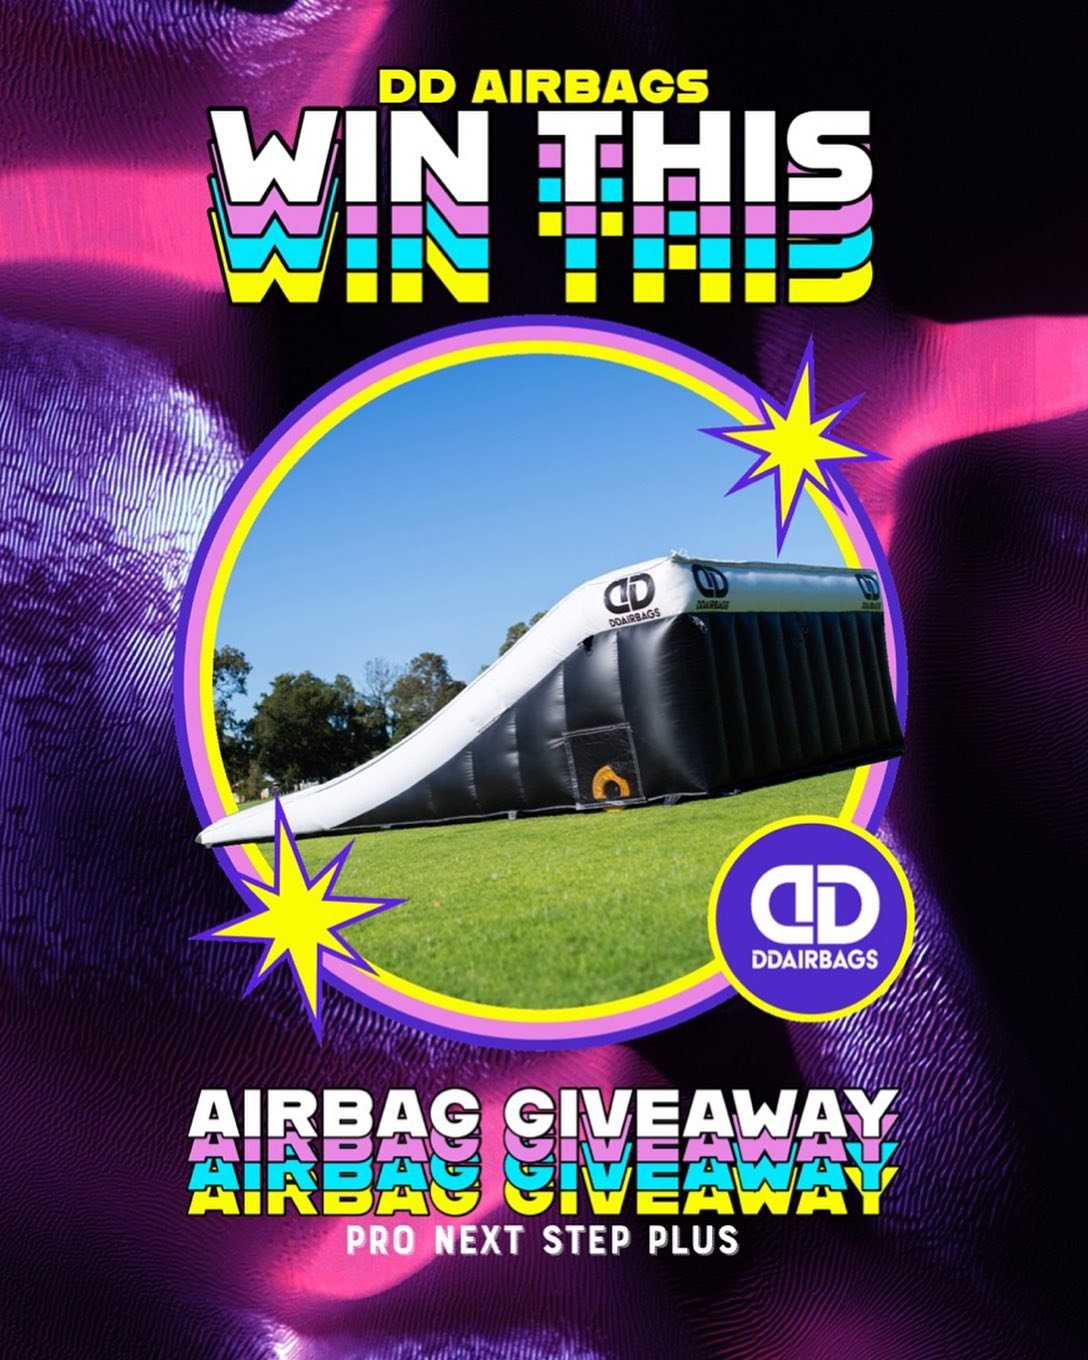 🚨🚨AIRBAG GIVEAWAY🚨🚨

We are giving away a Pro Next Step Plus Airbag Landing‼️‼️

1: Share this post and tag @ddairbags

2: Tag 4 friends in the comments

3: Follow @ddairbags

Winner will be announced 9th of June via Instagram and Facebook.

Plea